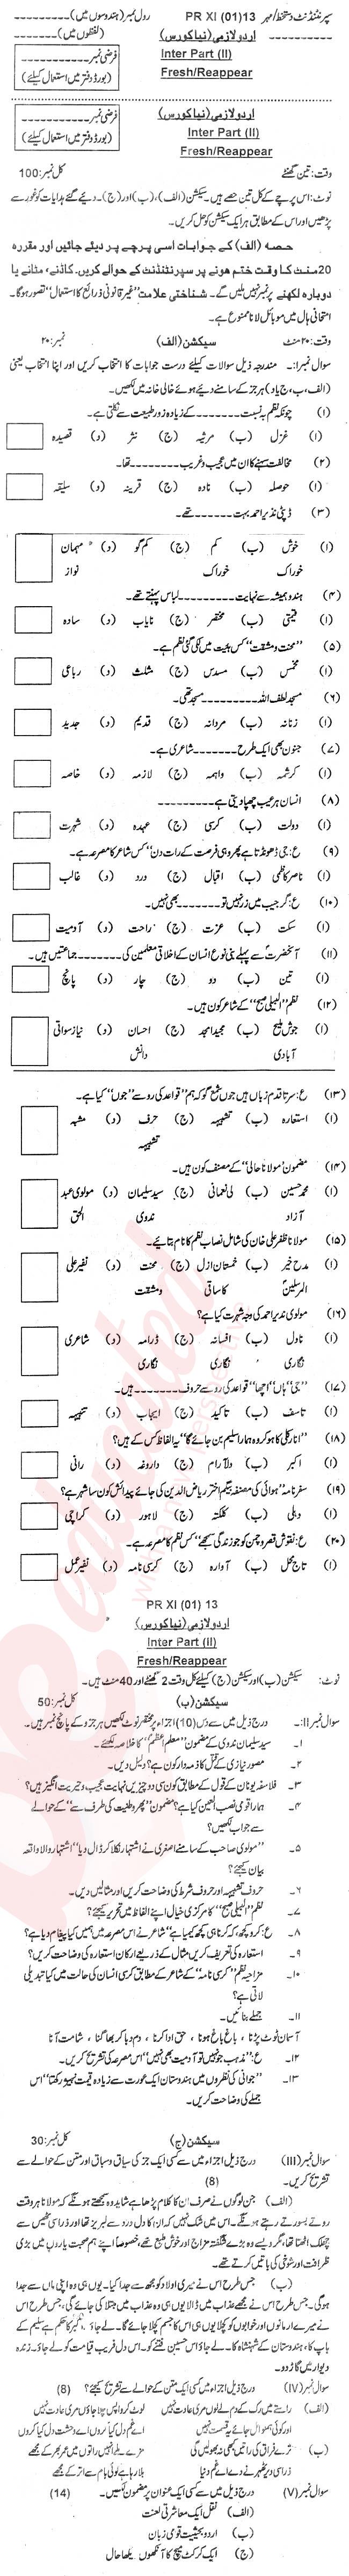 Urdu 12th class Past Paper Group 1 BISE Abbottabad 2013